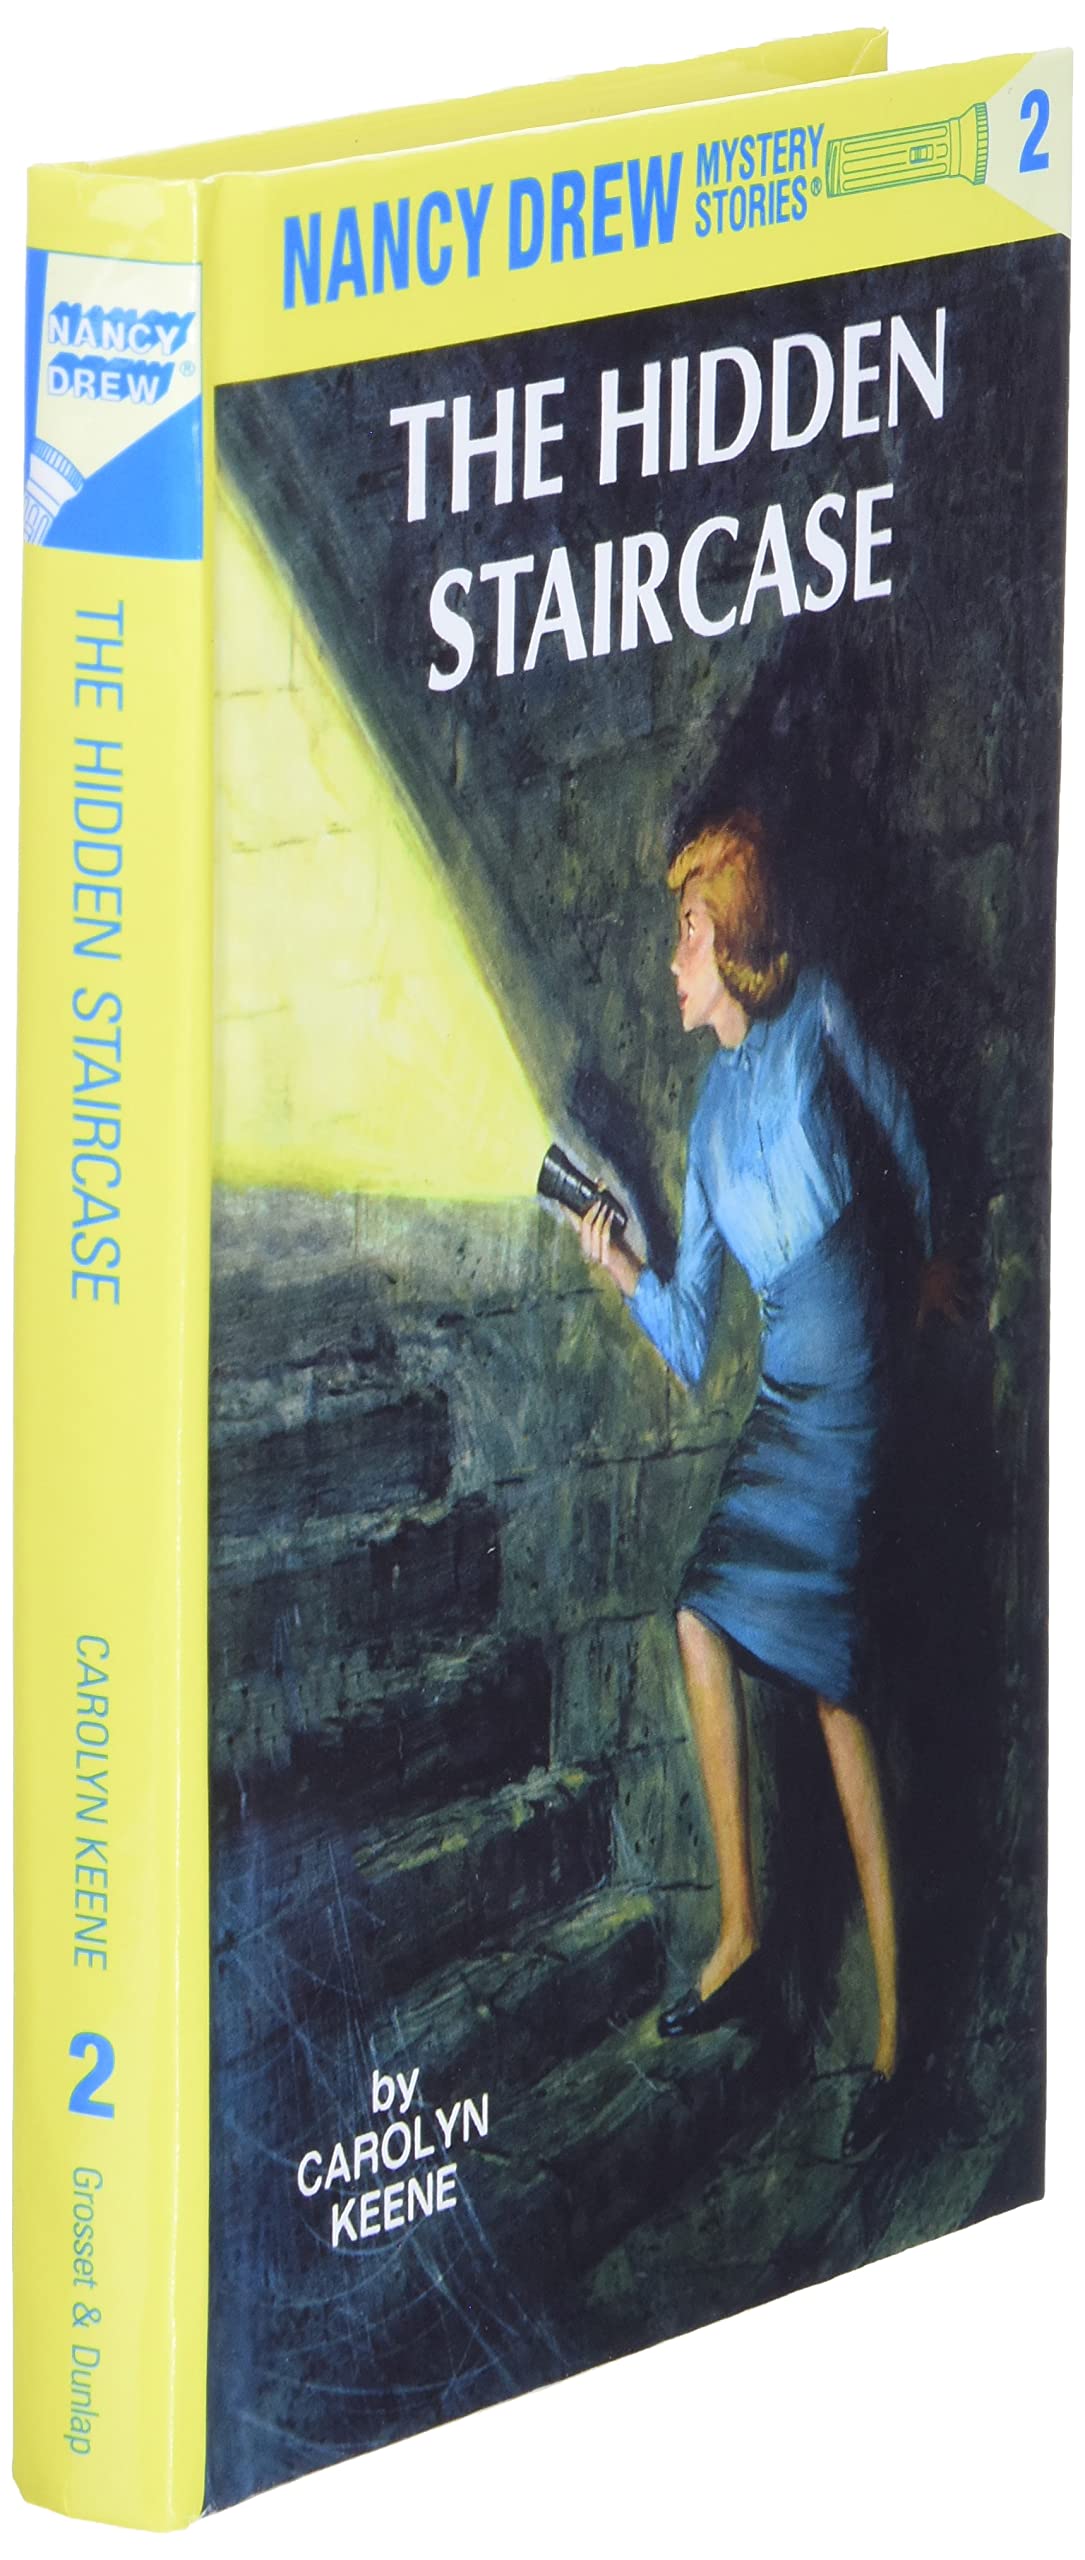 Nancy Drew Mystery Stories (2) - The hidden staircase